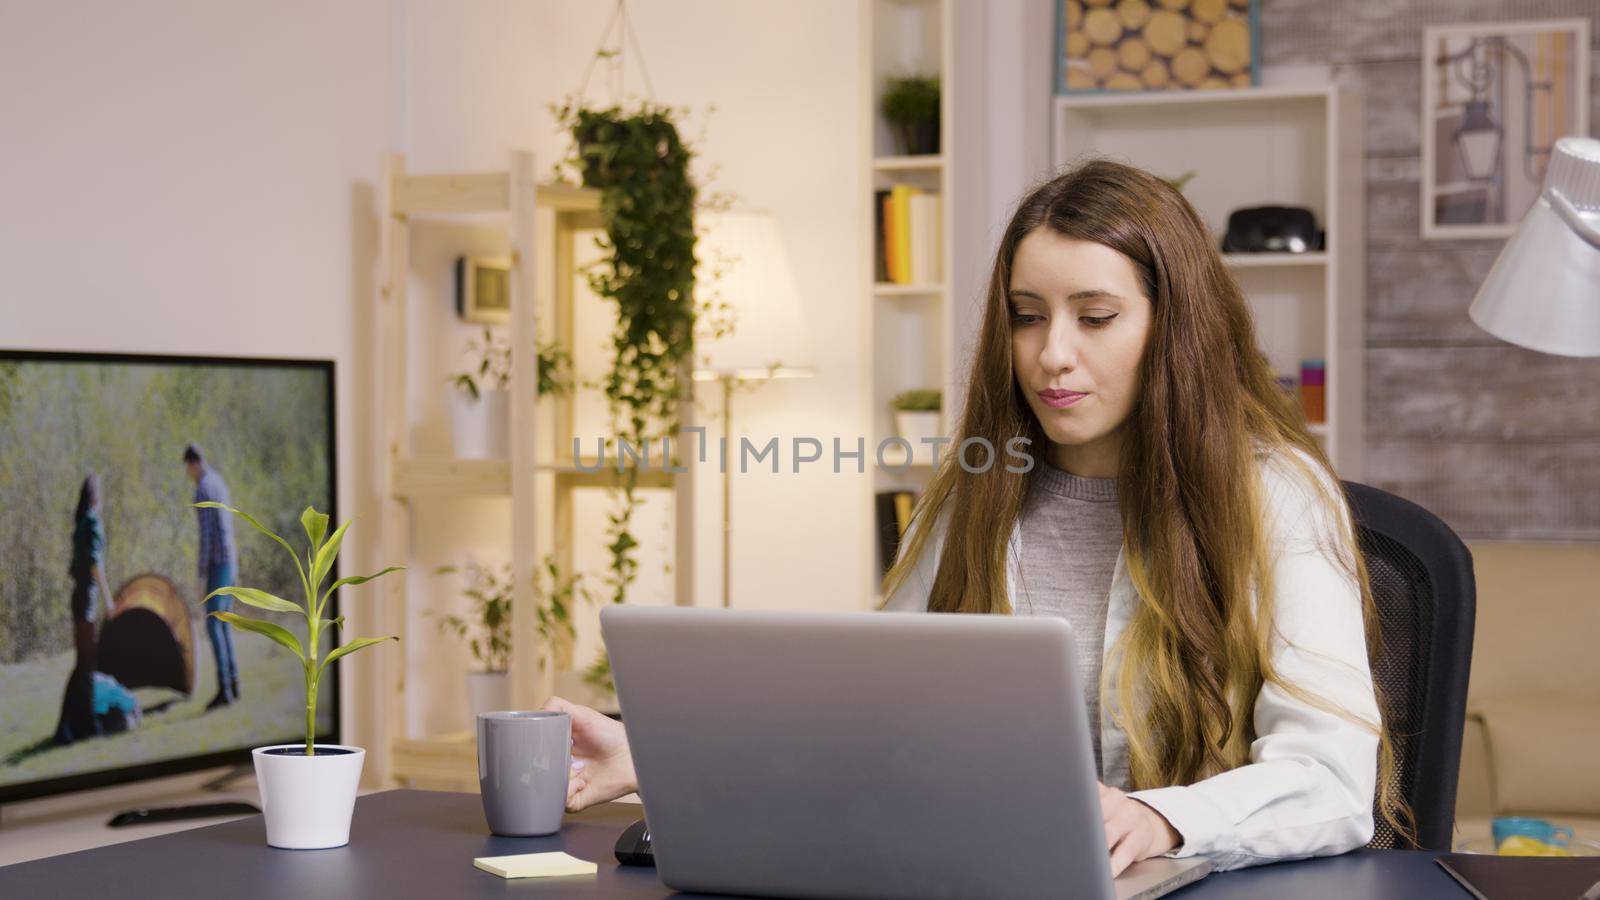 Girl working on laptop from home office. Girl taking a sip of coffee.